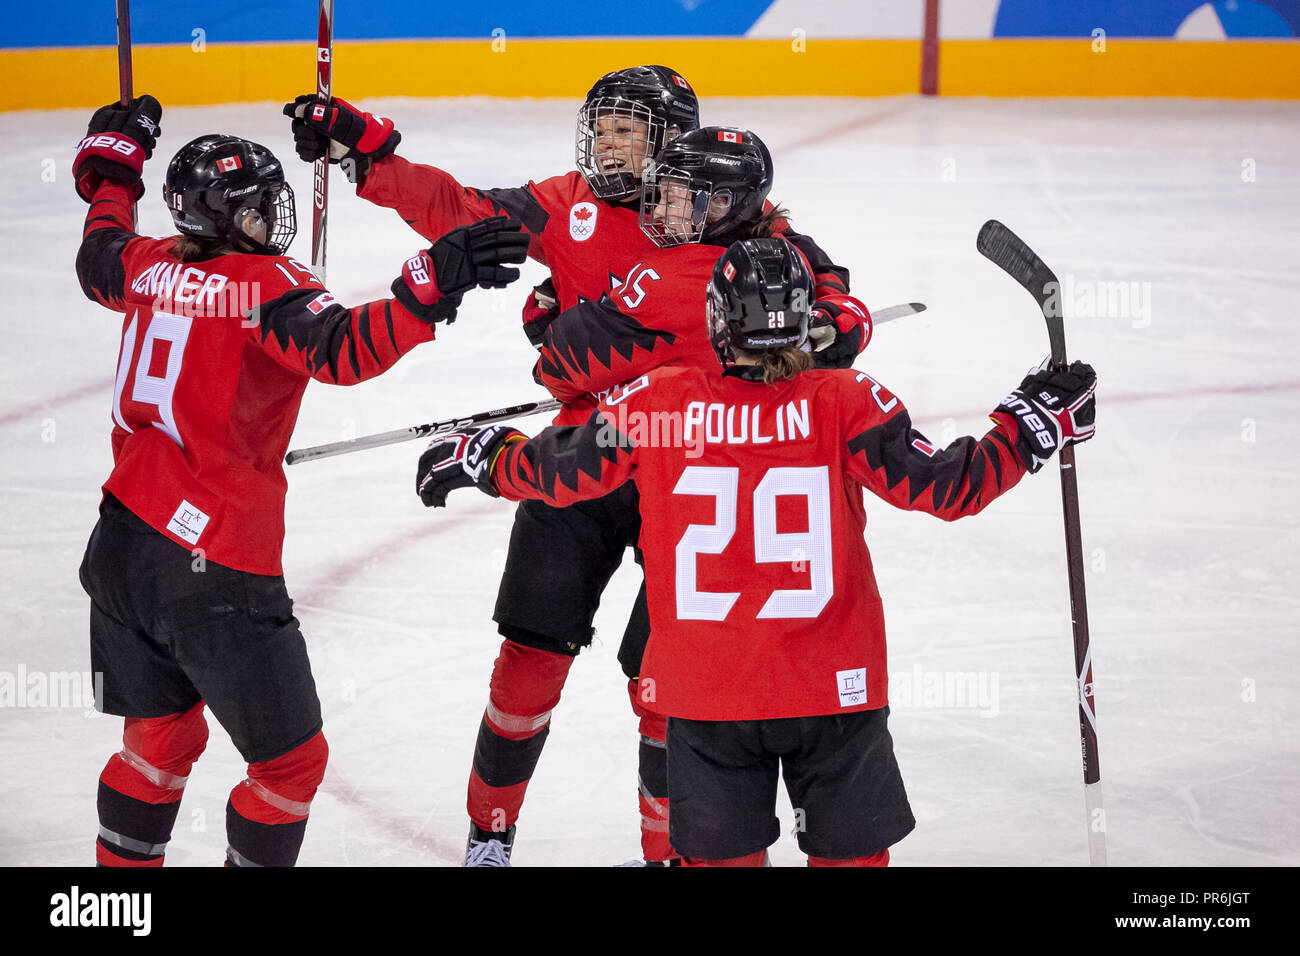 Team Canada celebrates goal vs Team OAR competing in Women's hockey at the Olympic Winter Games PyeongChang 2018 Stock Photo